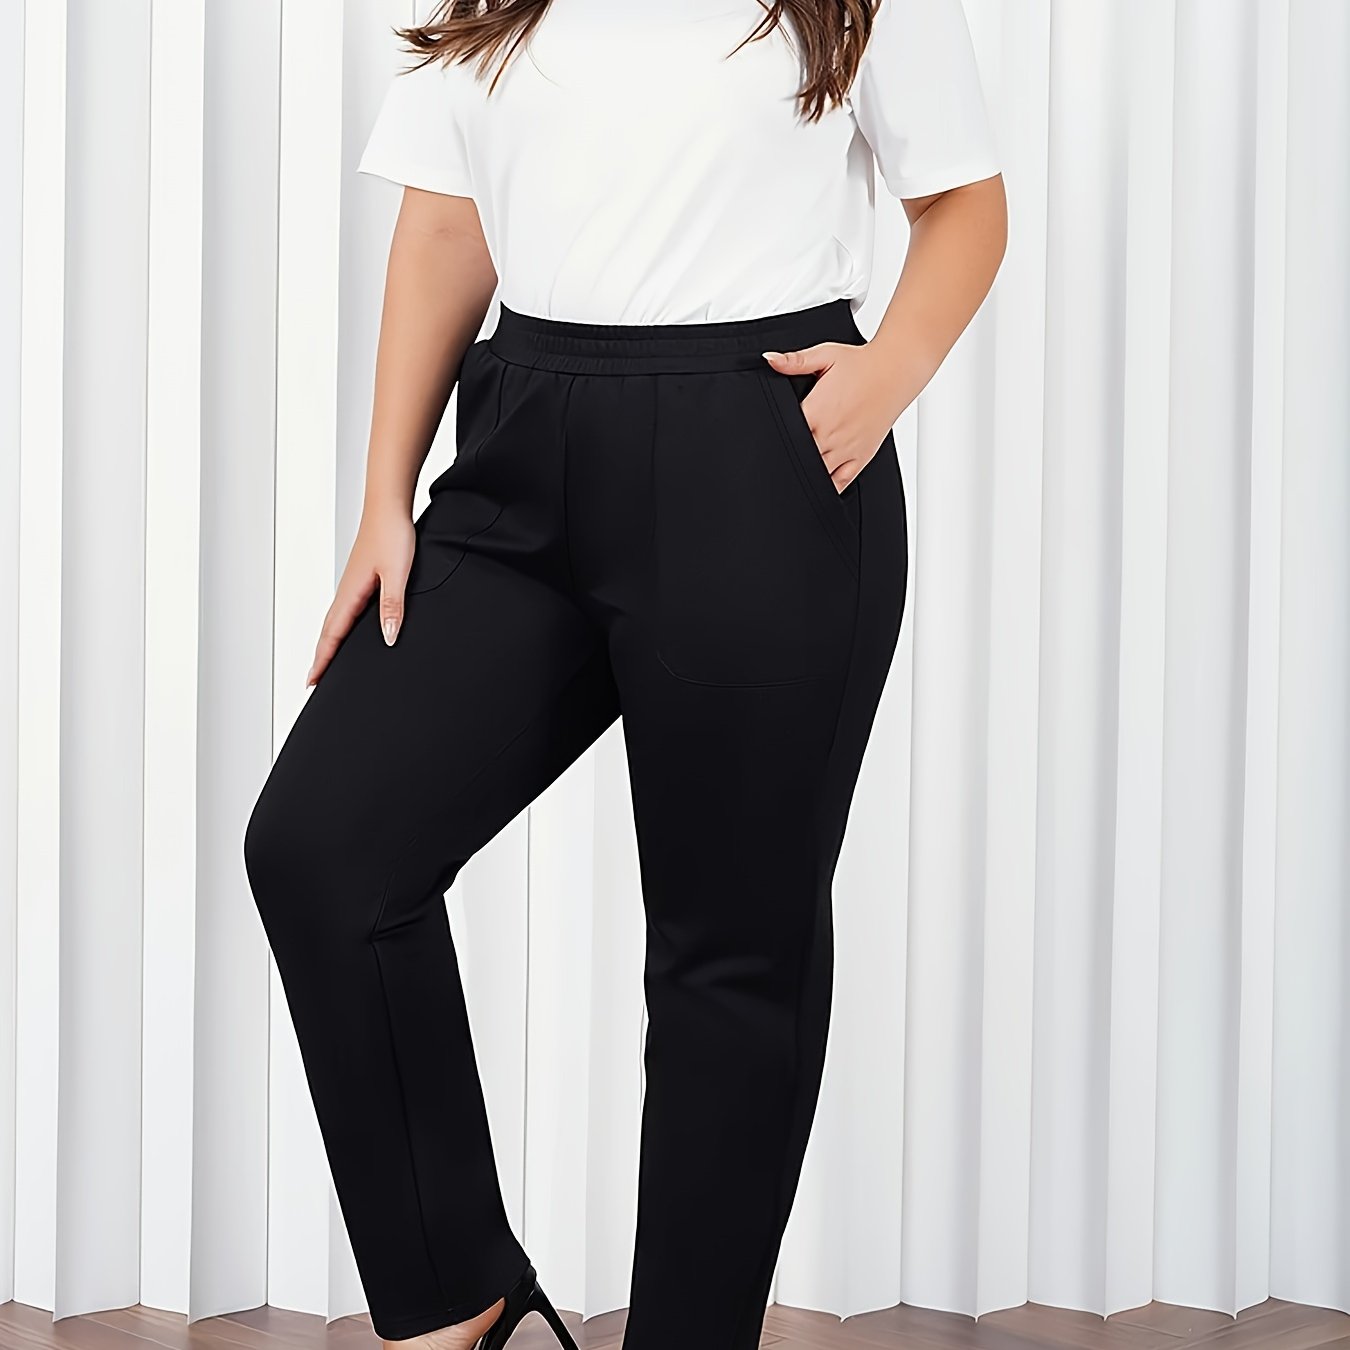 Shop Plus Size Tall Editorial Full Length Work Pant in Black, Sizes 12-30